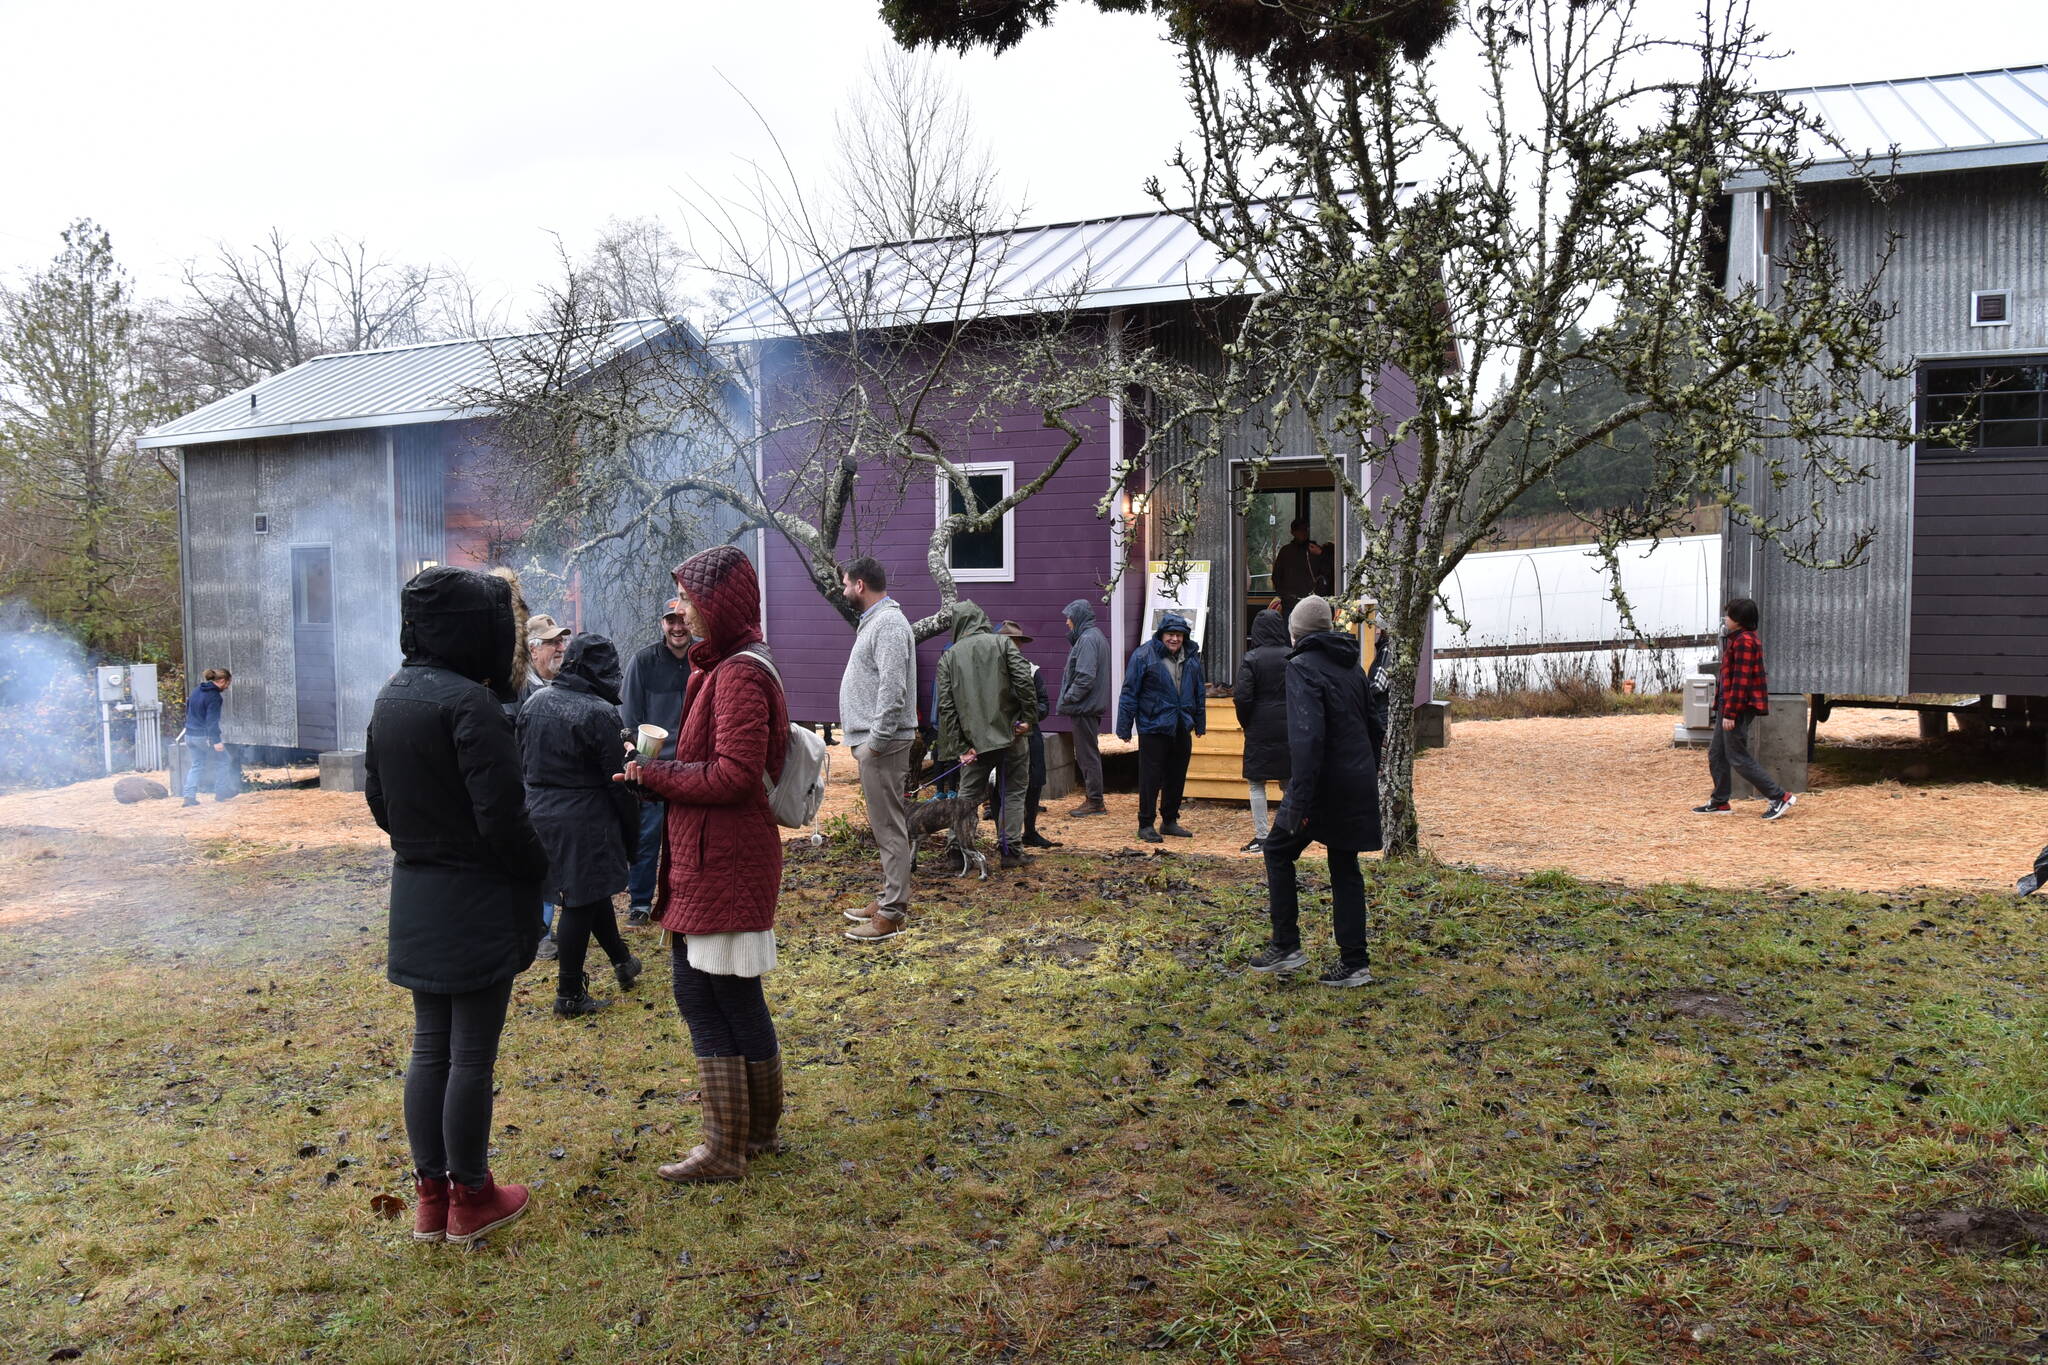 Volunteers and partners visit the Morales Farm to view the tiny homes that the community of Bainbridge Island built.